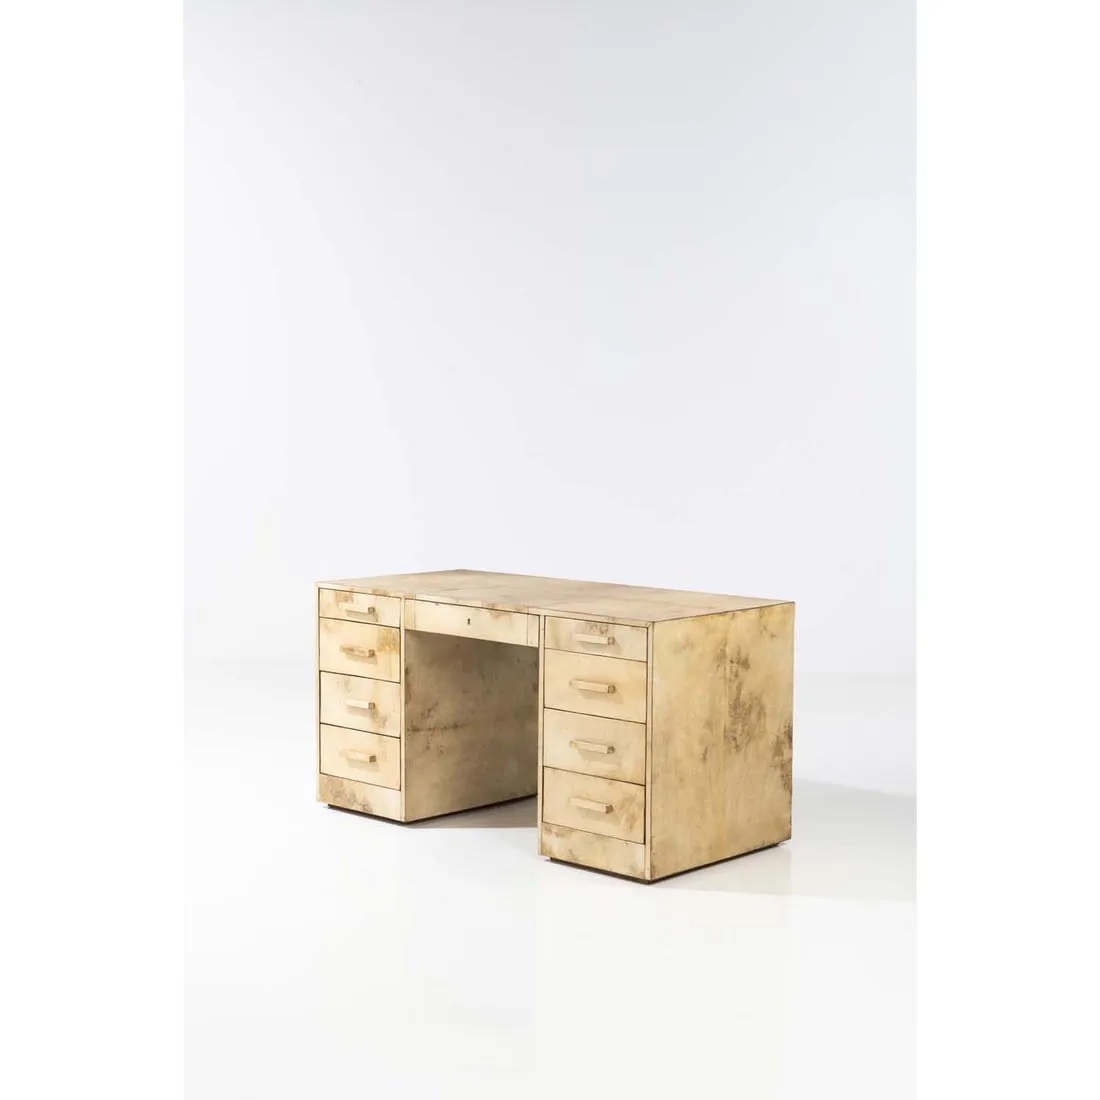 Jean-Michel Frank desk with compartments, estimated at €70,000-€90,000 ($76,205-$97,980) at Piasa.